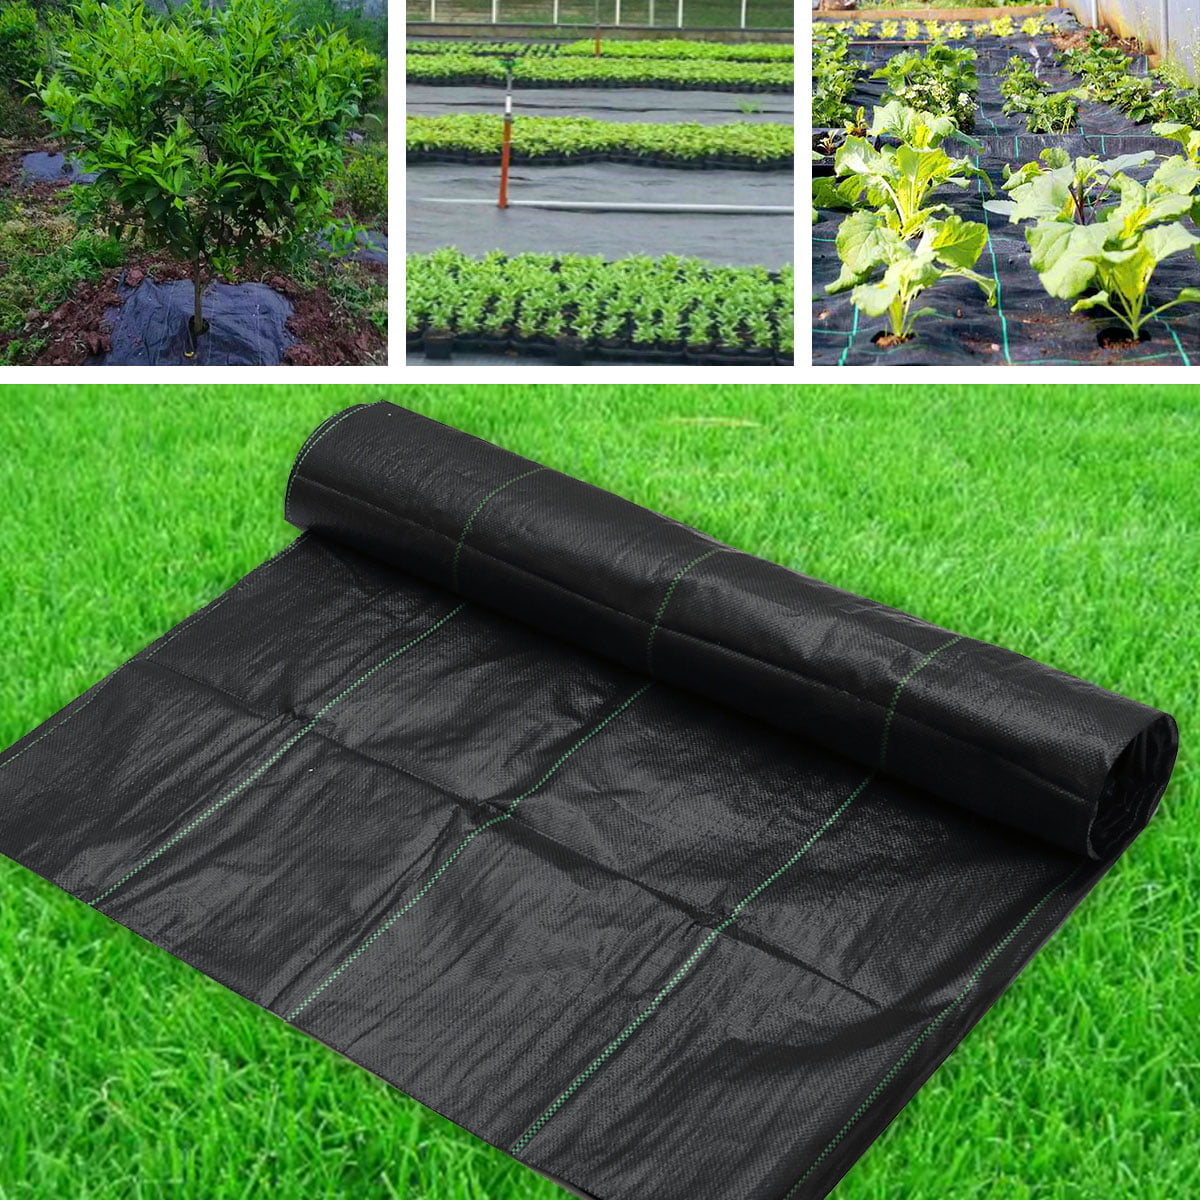 4m Wide 100g Weed Control Fabric Garden Landscape Ground Cover Membrane Mulch 